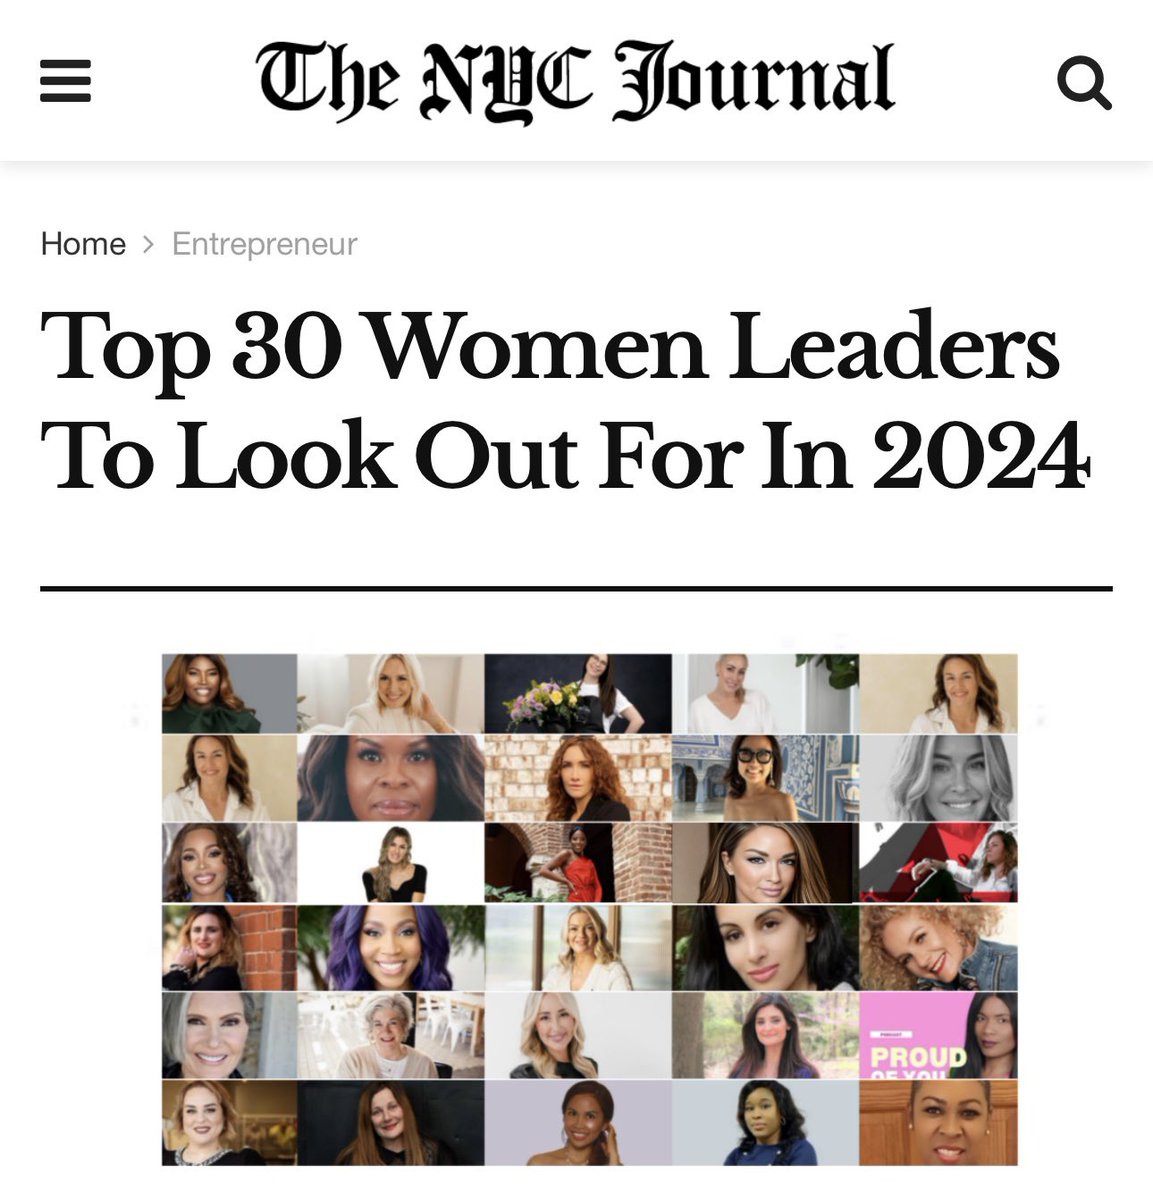 Thank you @TheNYCJournal I feel so honoured to be featured with all these amazing women  #ksyran #thenycjournal #top30women